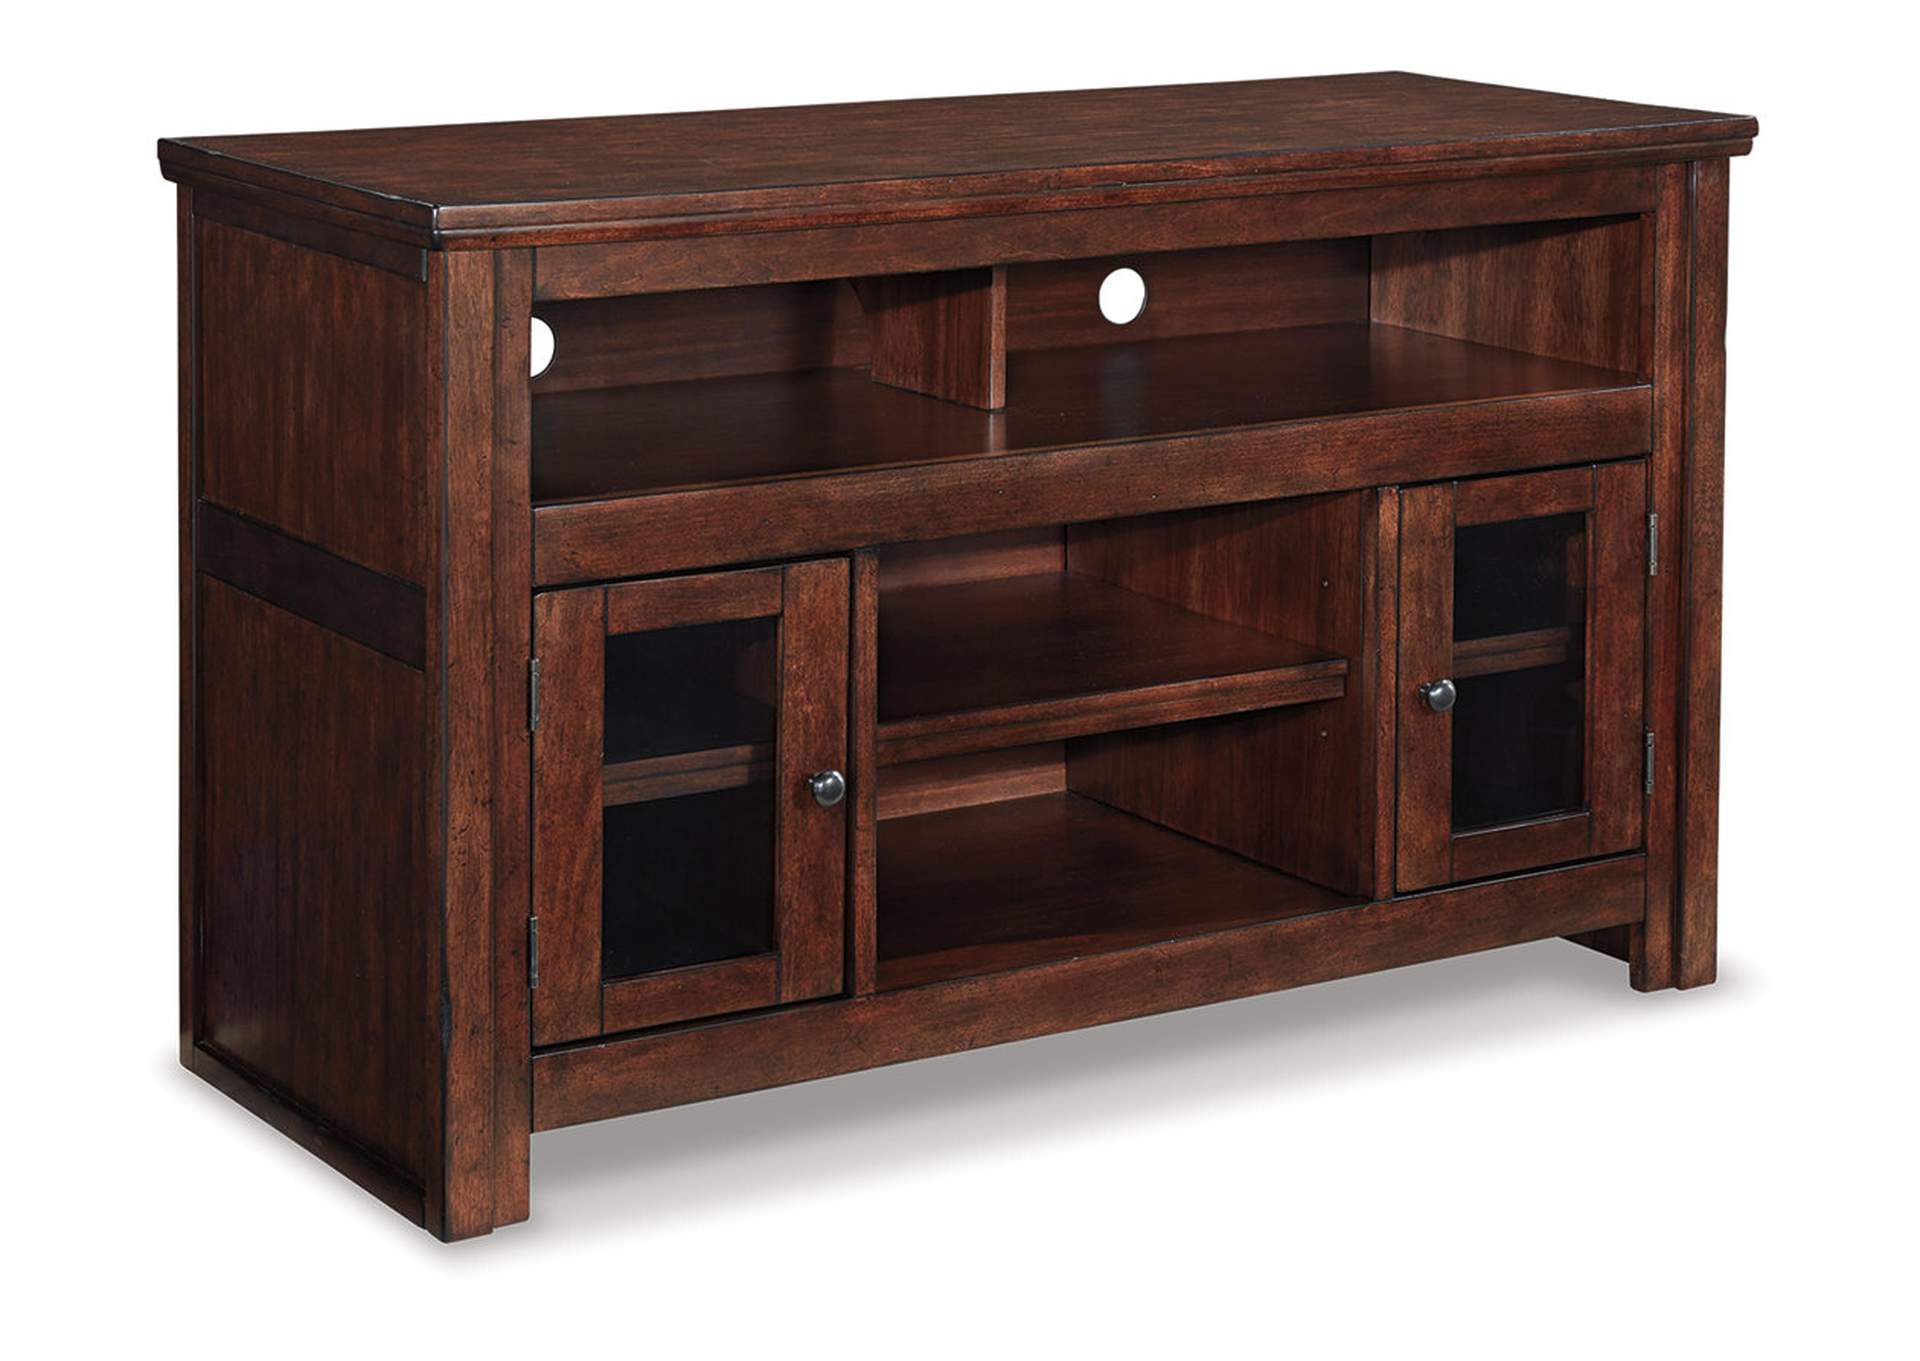 Harpan 50" TV Stand,Signature Design By Ashley